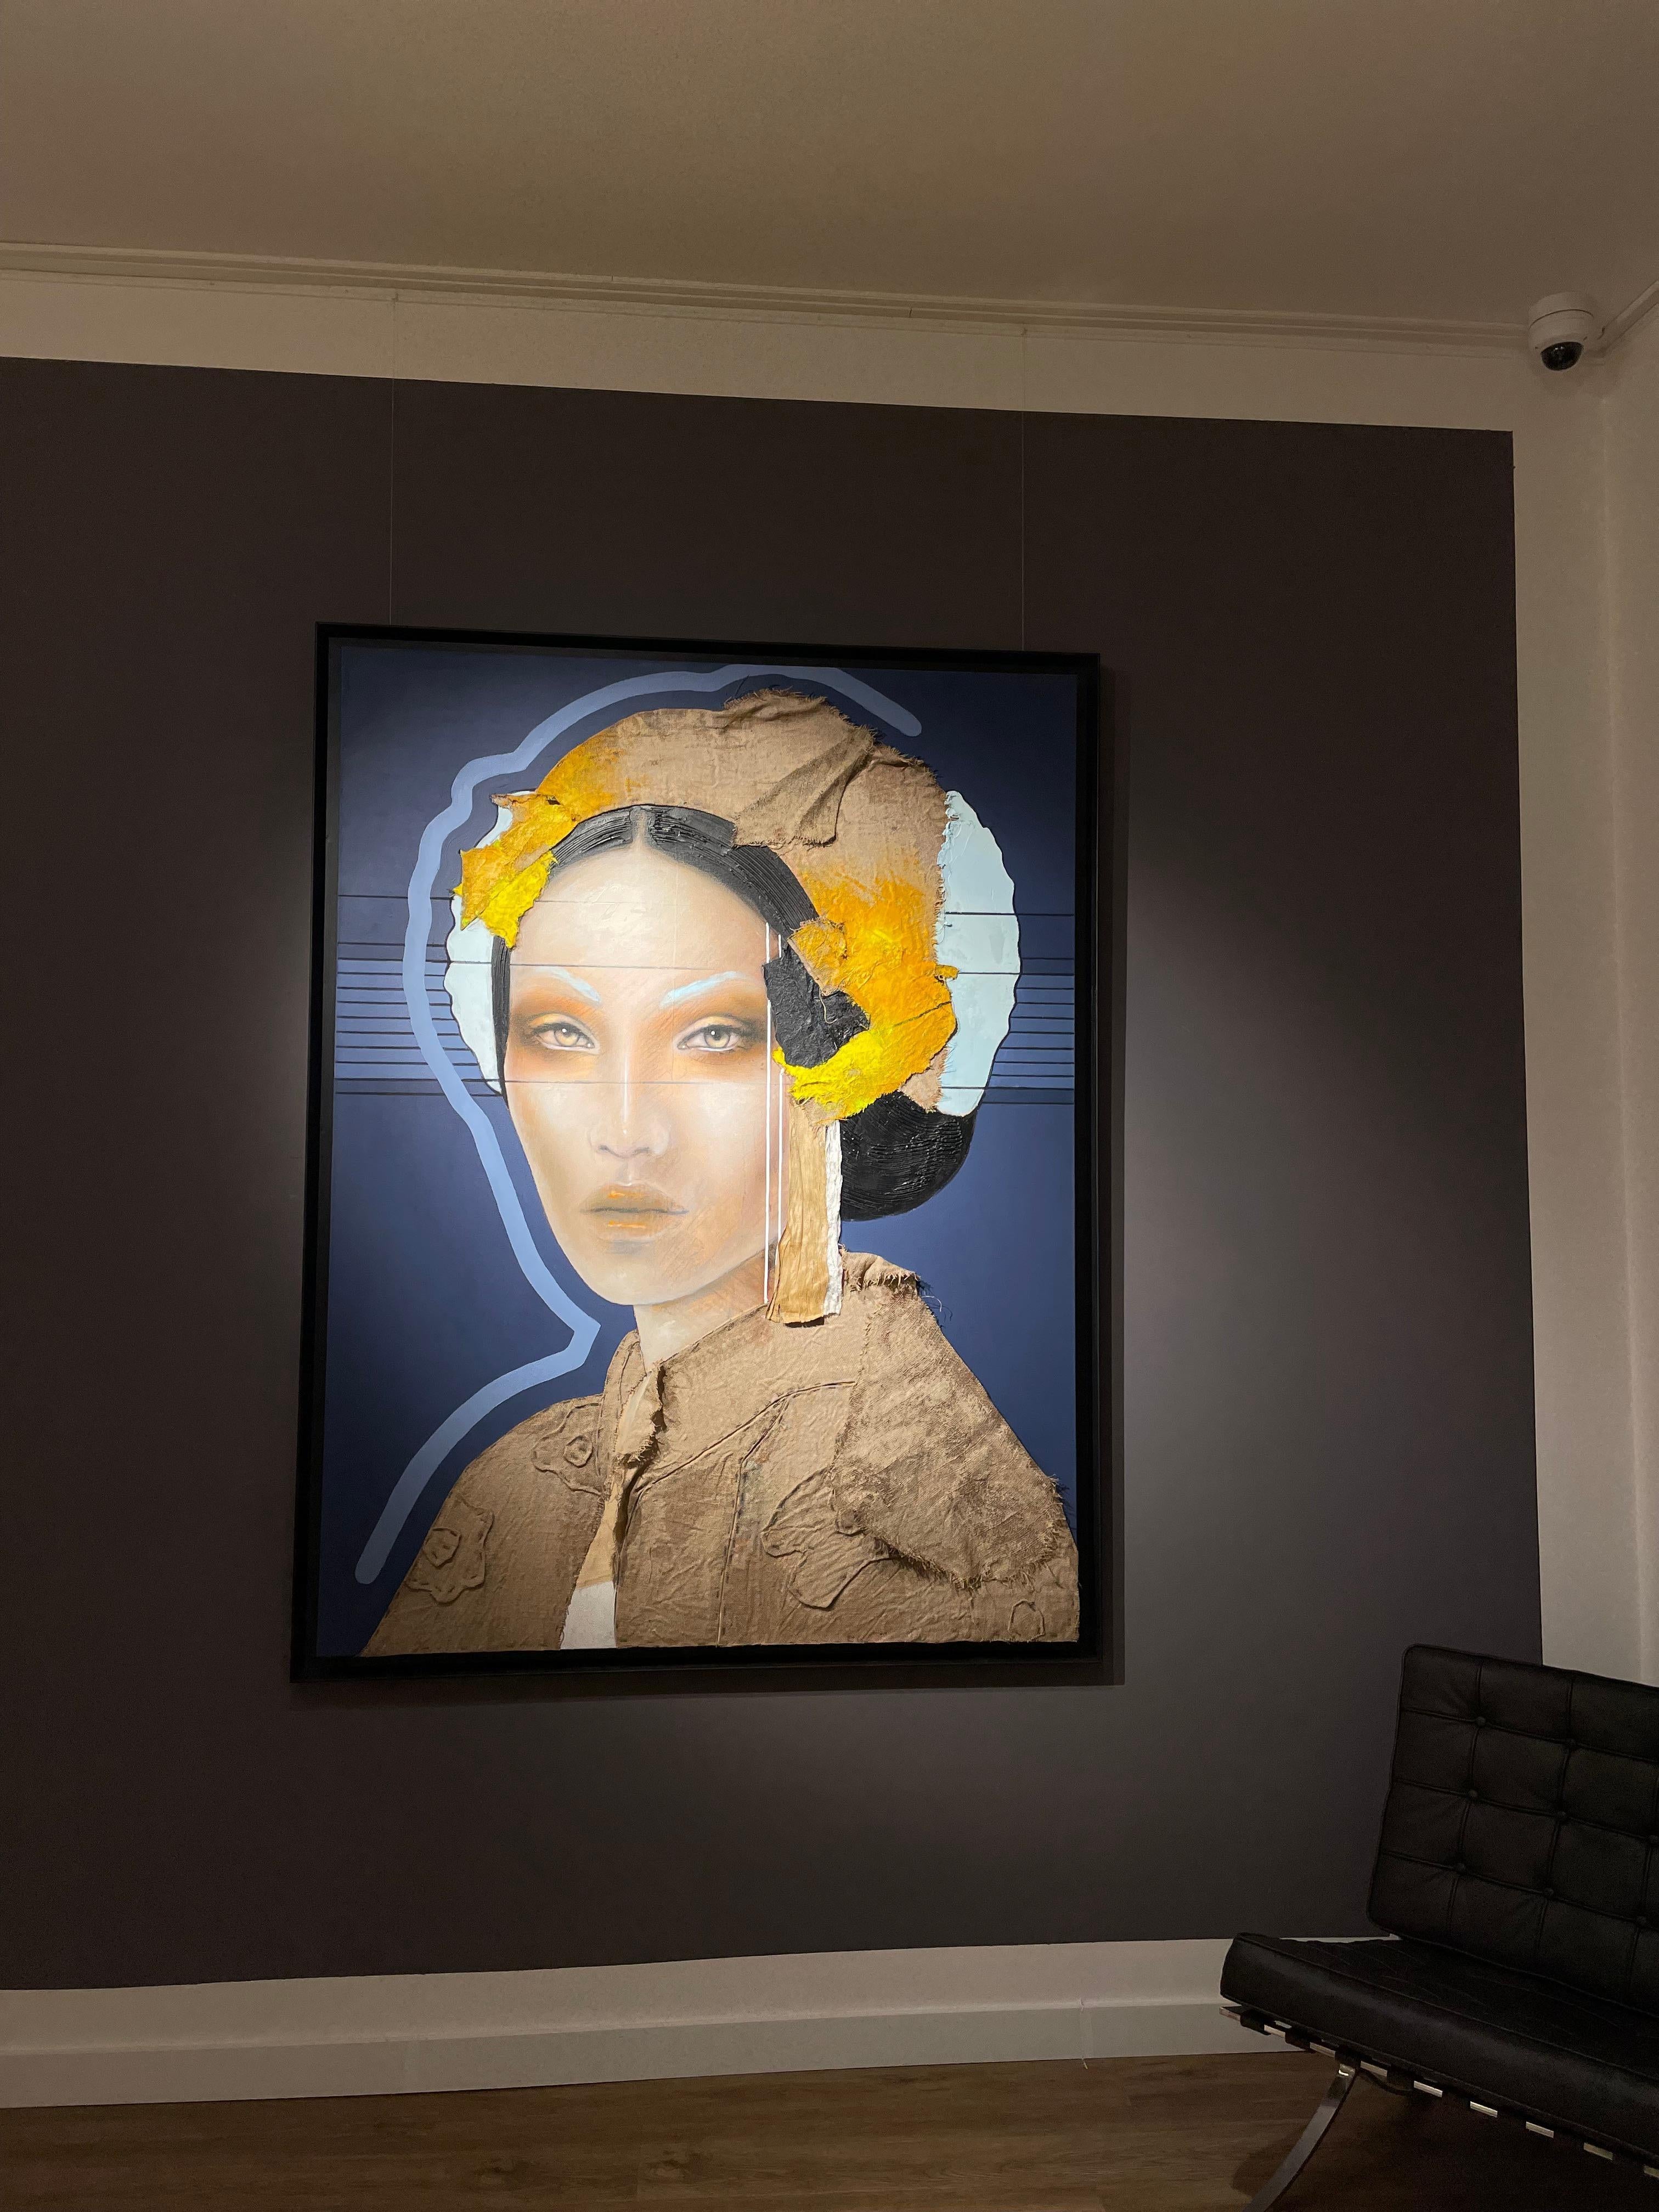 This artwork is part of Ger Doornink's latest show 'Thoughts', where his mastery in portrait painting is reflected and makes evident his role as a craftsman who embraces new materials and textures to capture and represent the essence of his